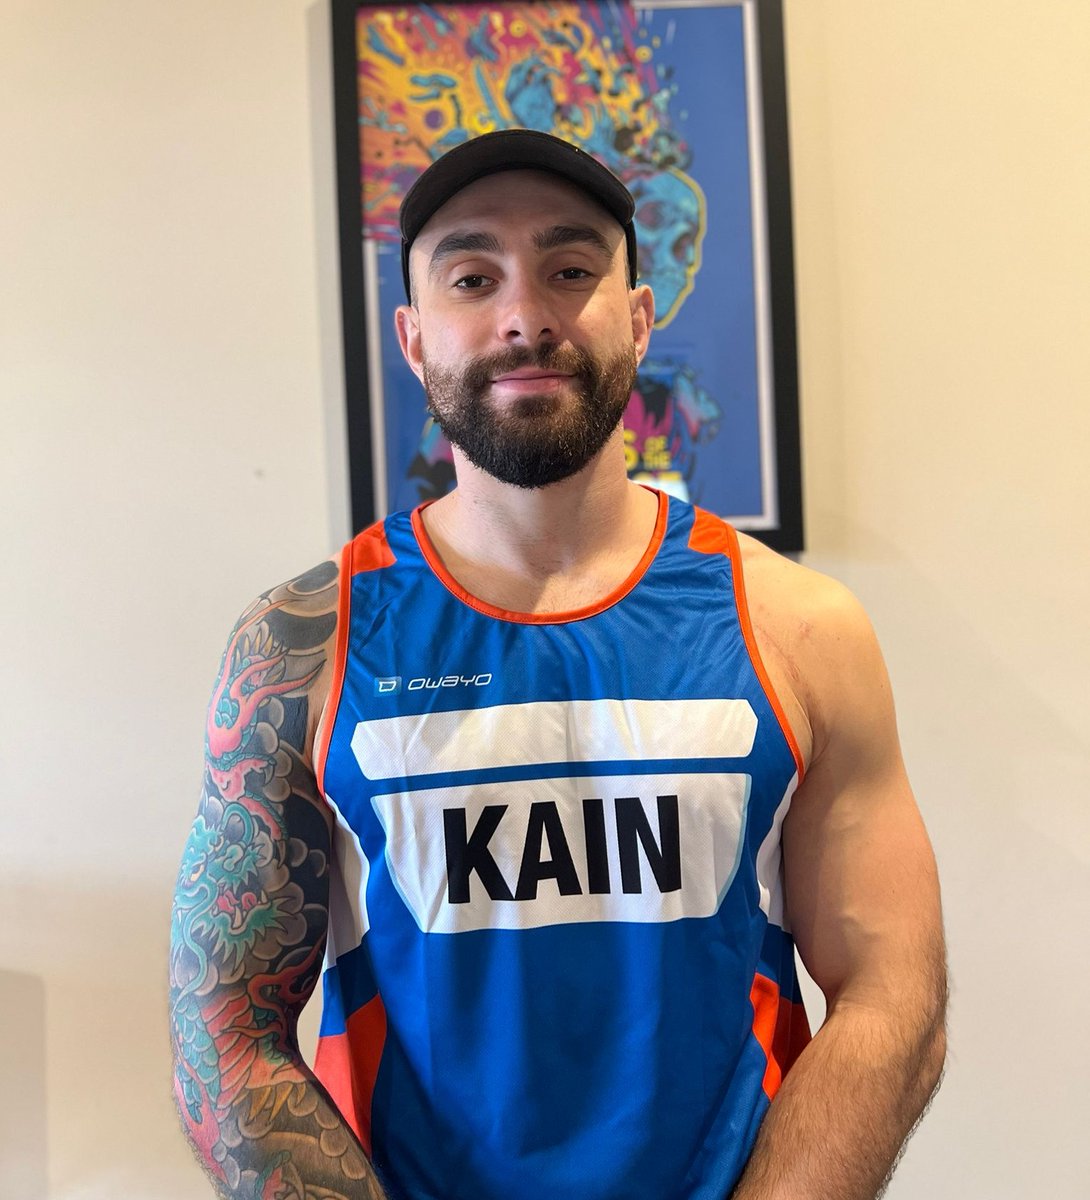 One of our regular fundraisers Kain Rix is running the London Marathon to support us again. Find out more about his journey: